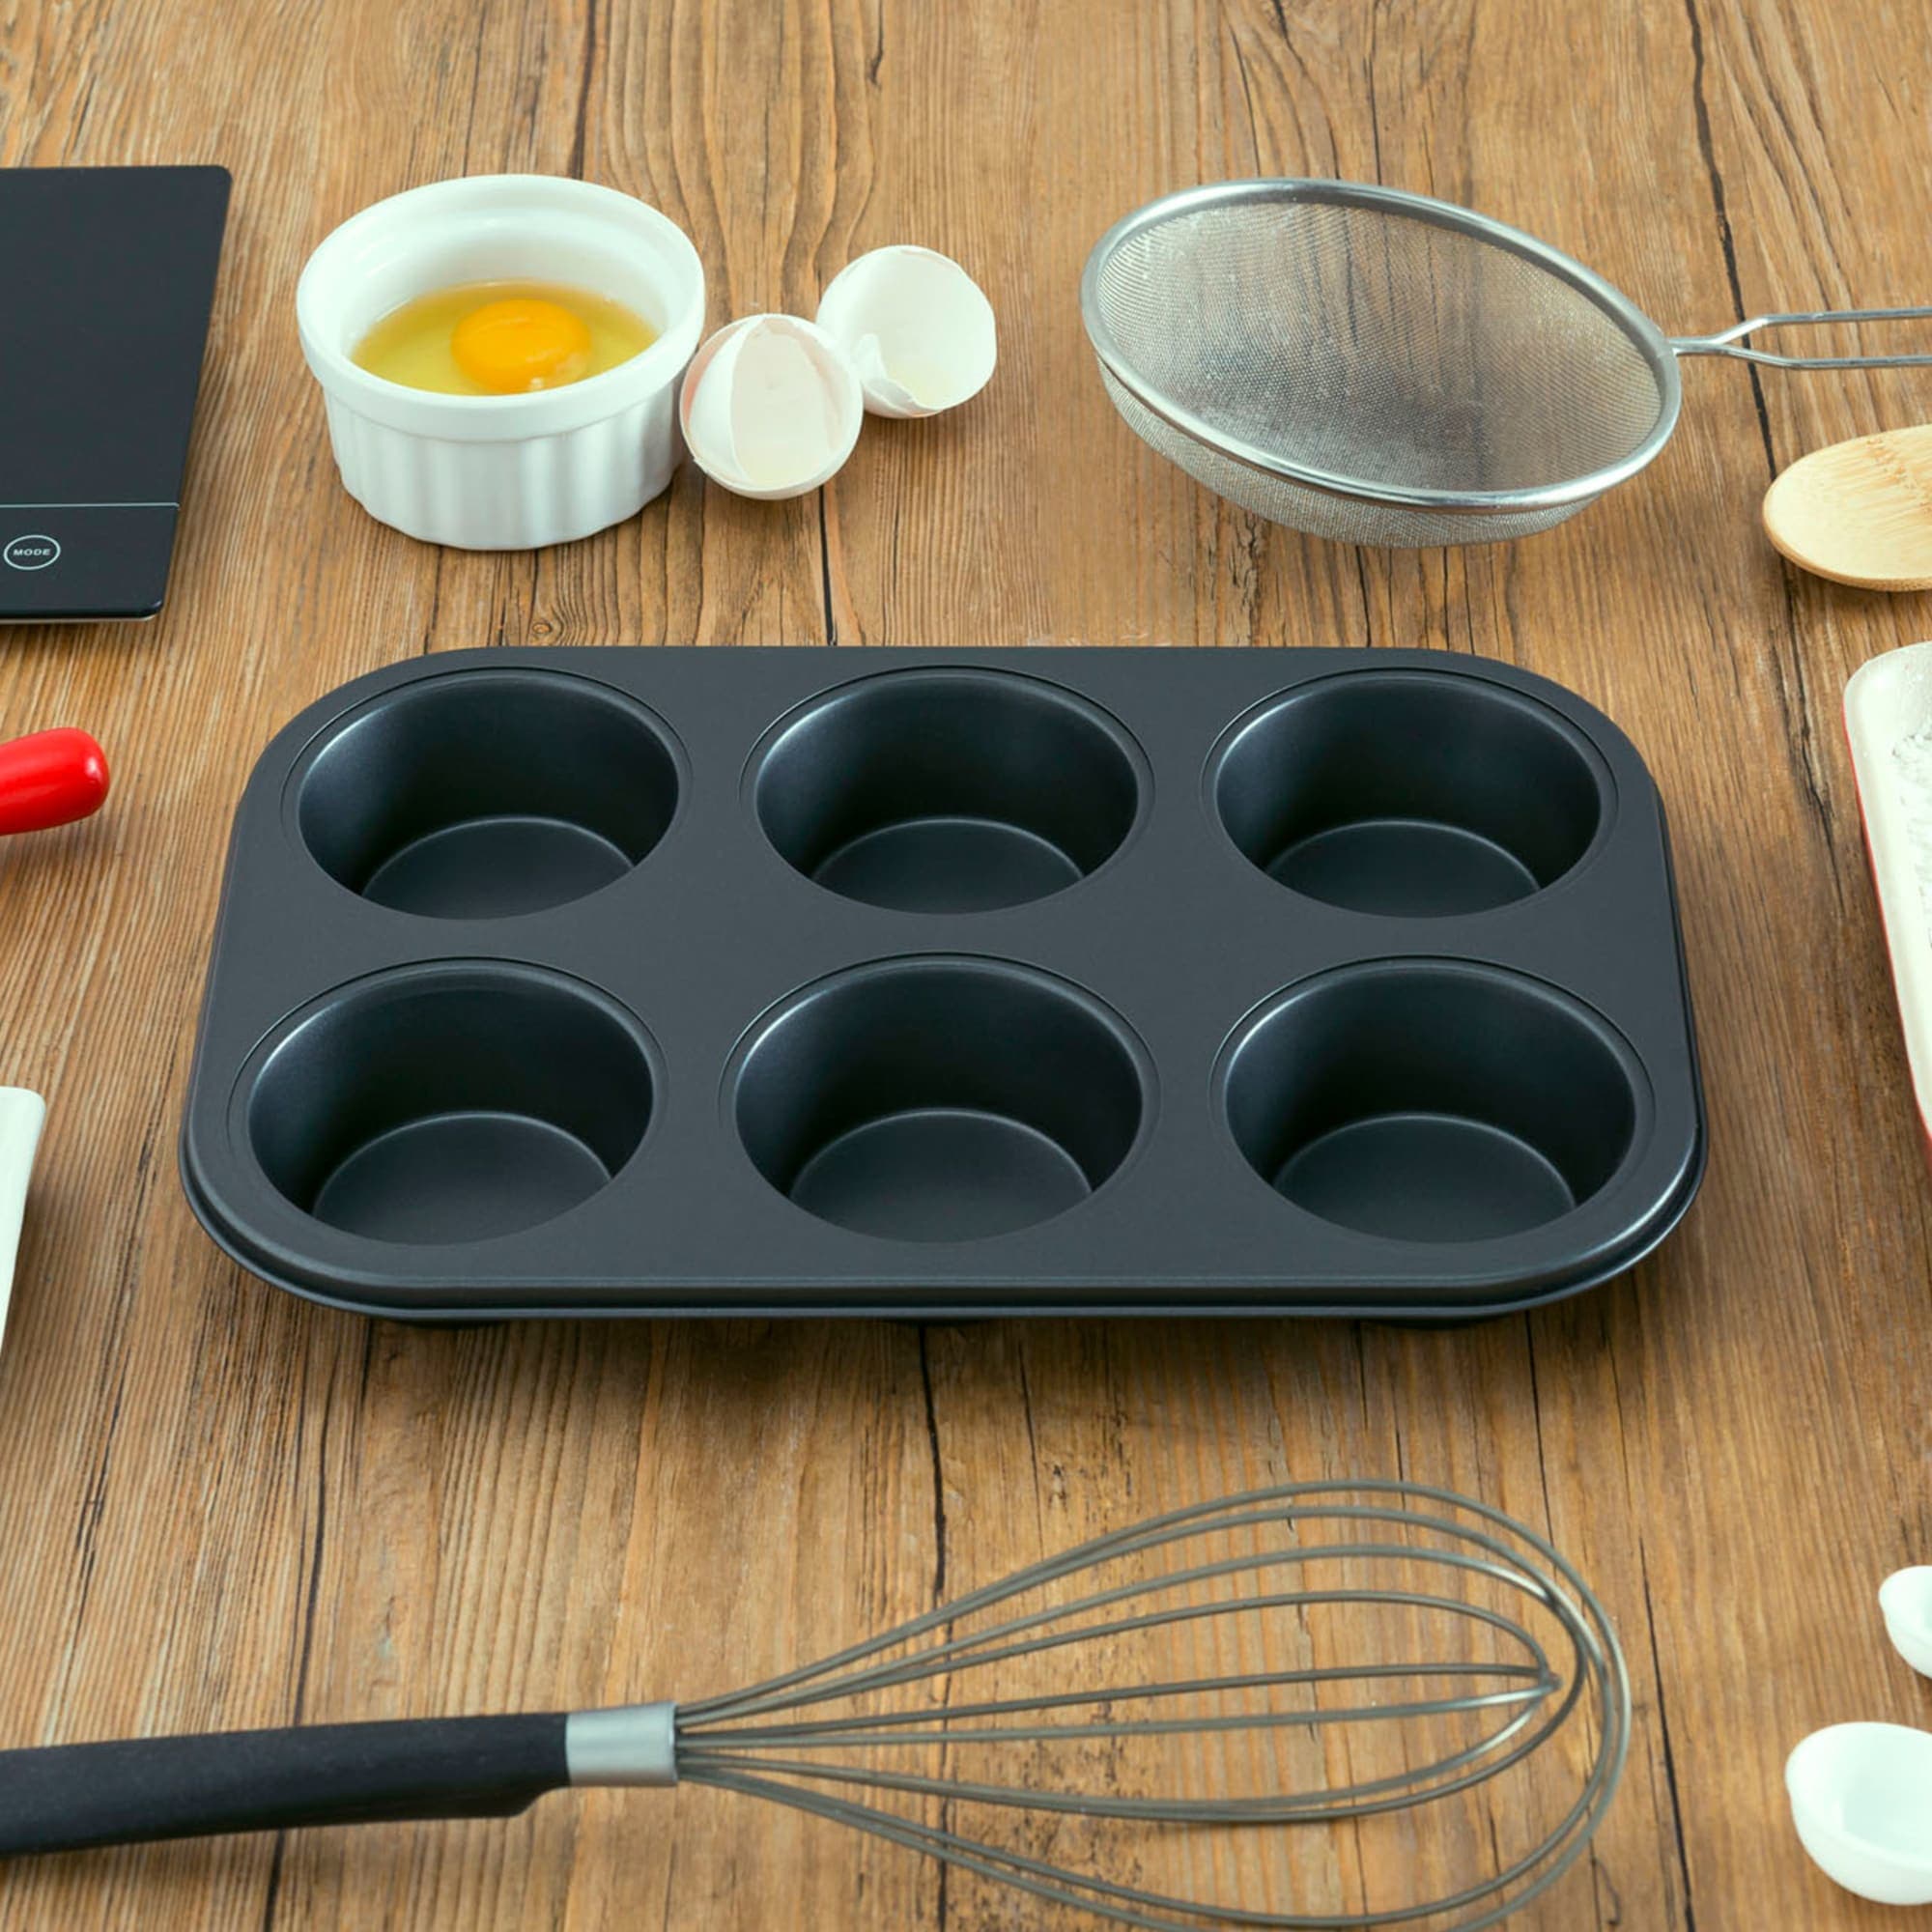 Home Basics Non-Stick 6 Cup Muffin Pan $4.00 EACH, CASE PACK OF 24